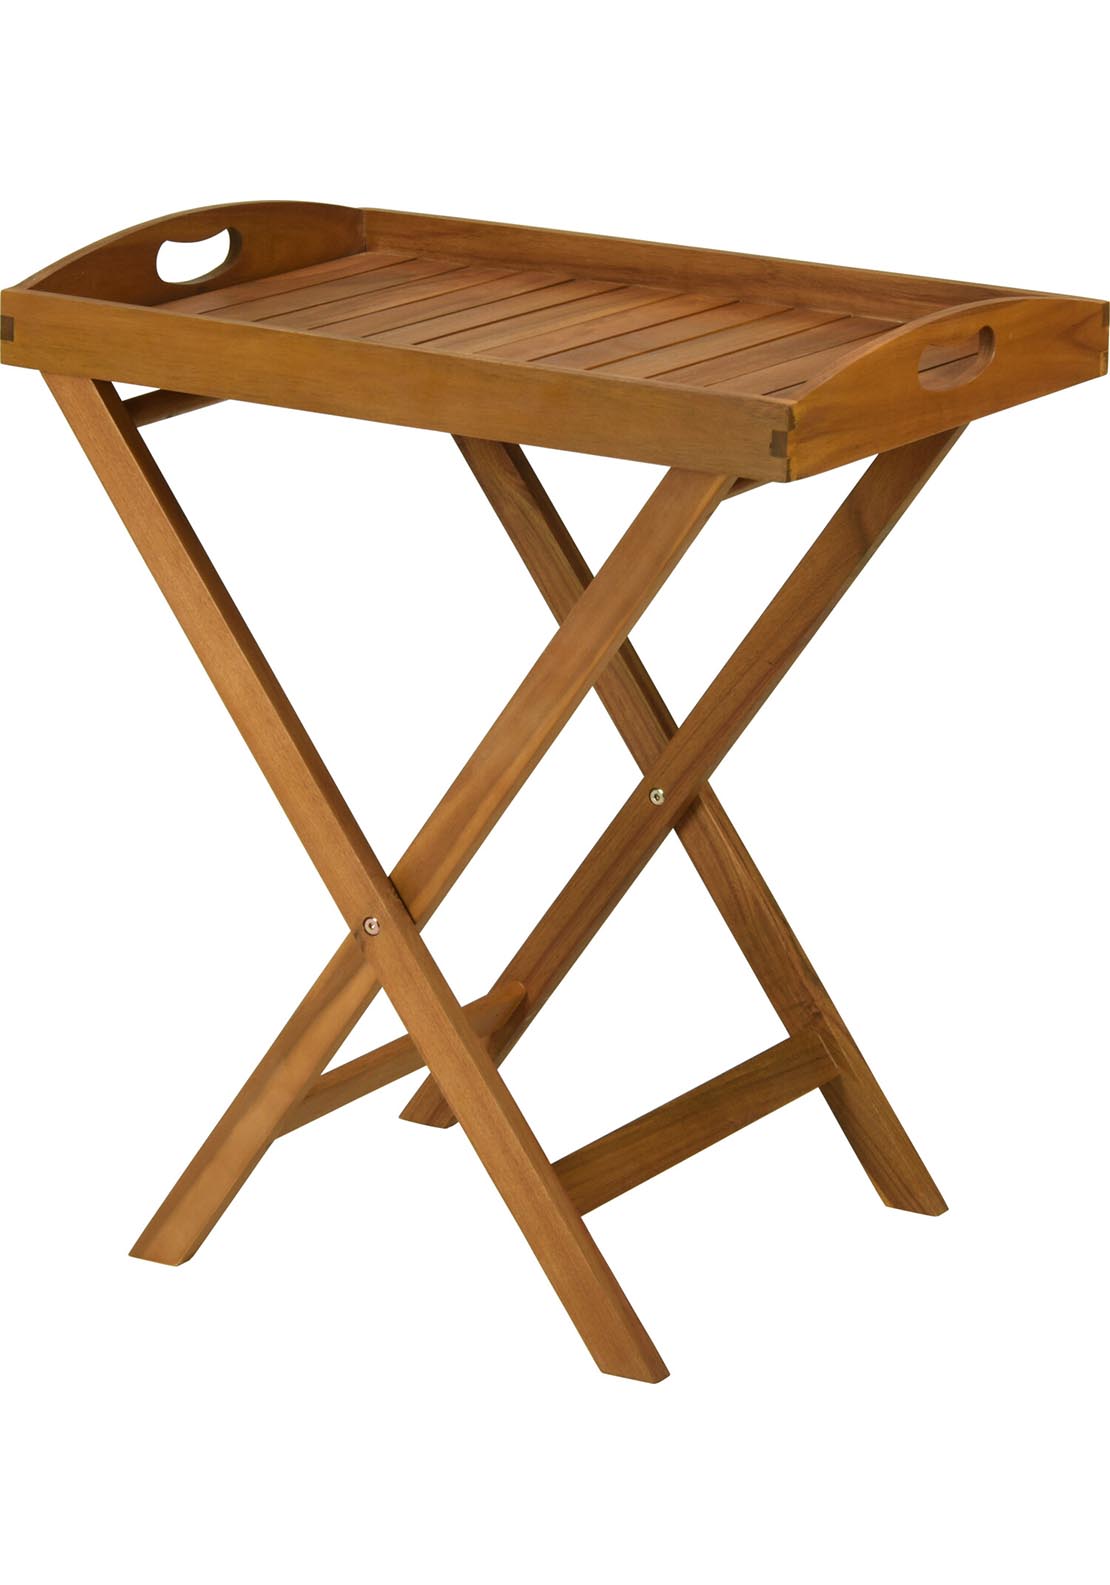 The Home Garden Table Foldable With Tea Tray 1 Shaws Department Stores